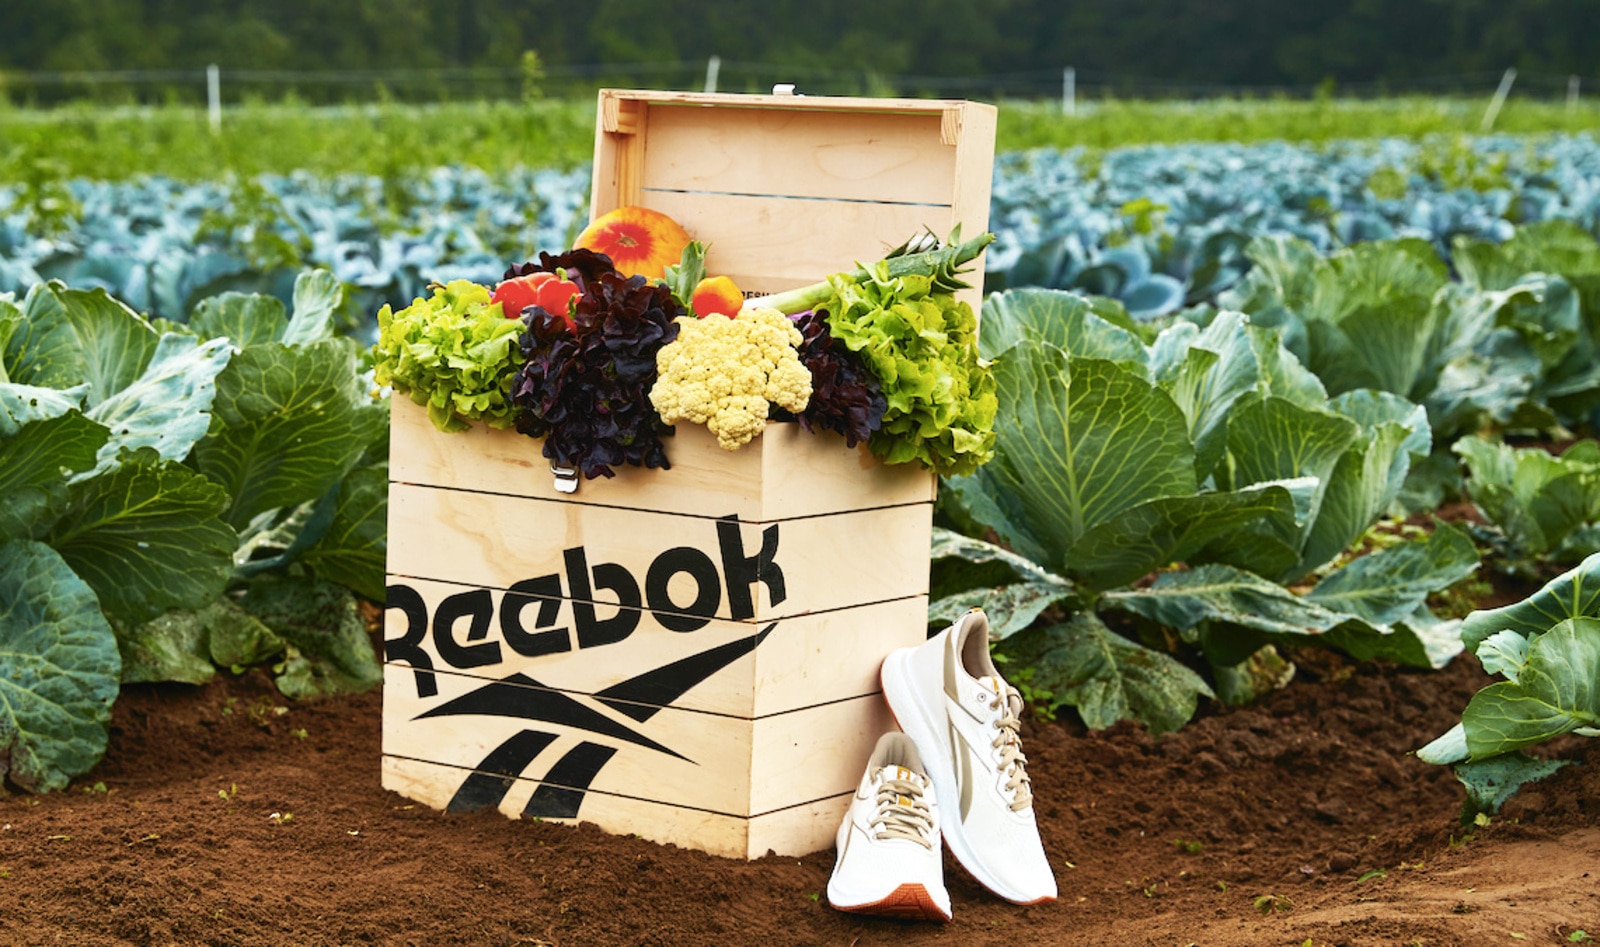 Reebok's New Vegan Sneakers Come with a Box of Produce